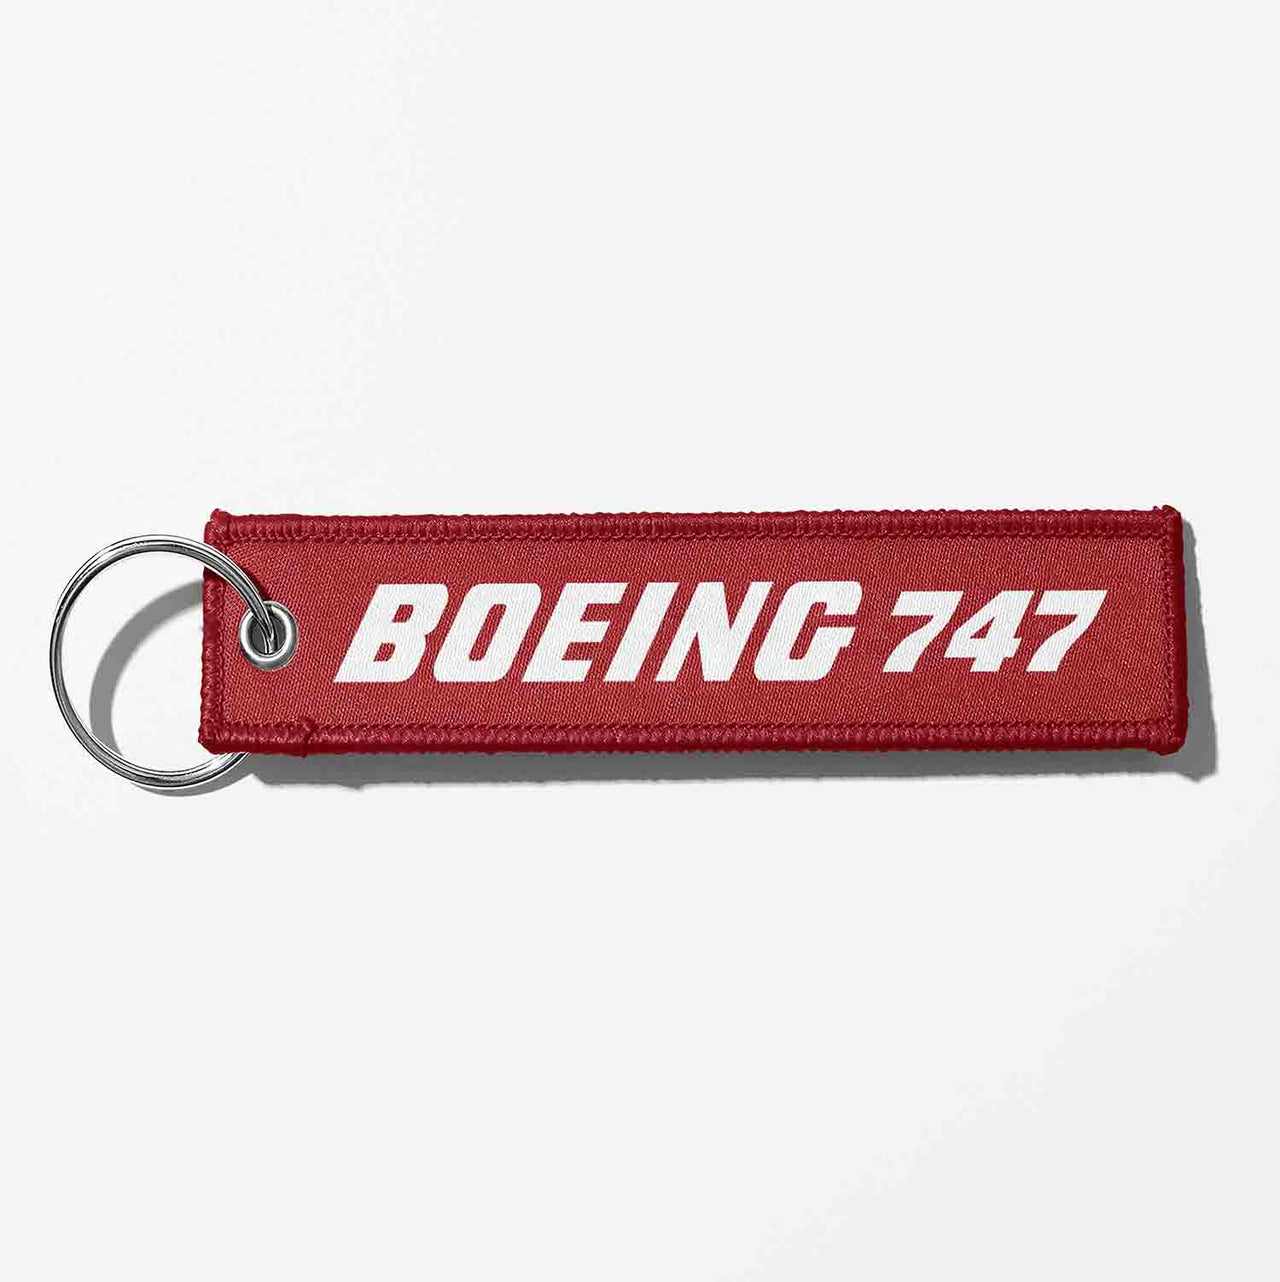 Boeing 747 & Text Designed Key Chains